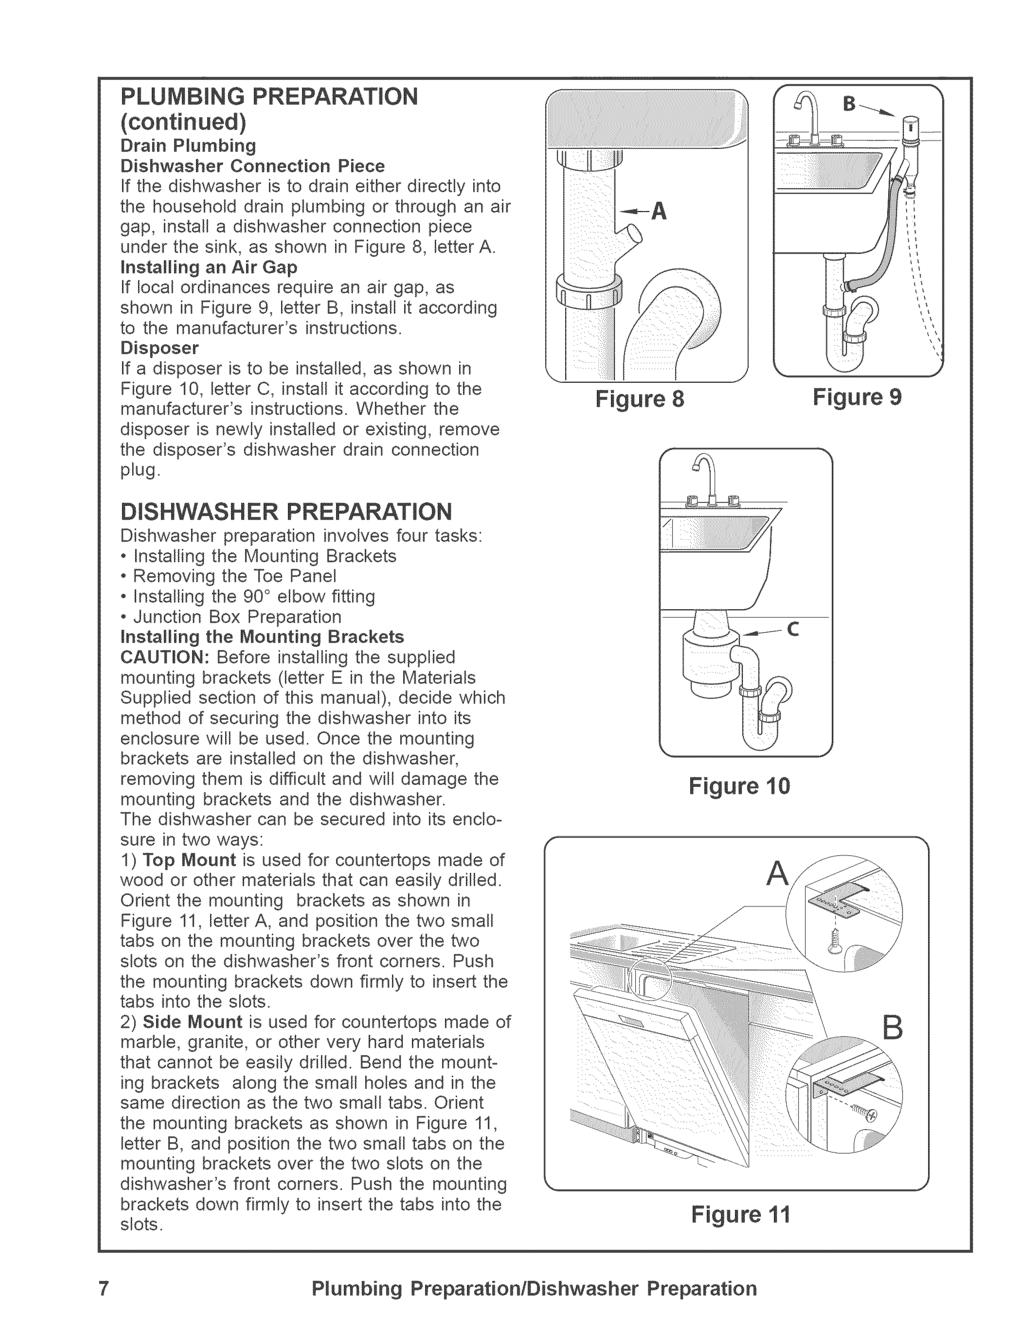 PLUMBING (continued) PREPARATION Brain P_umbing Dishwasher Connection Piece If the dishwasher is to drain either directly into the household drain plumbing or through an air gap, install a dishwasher